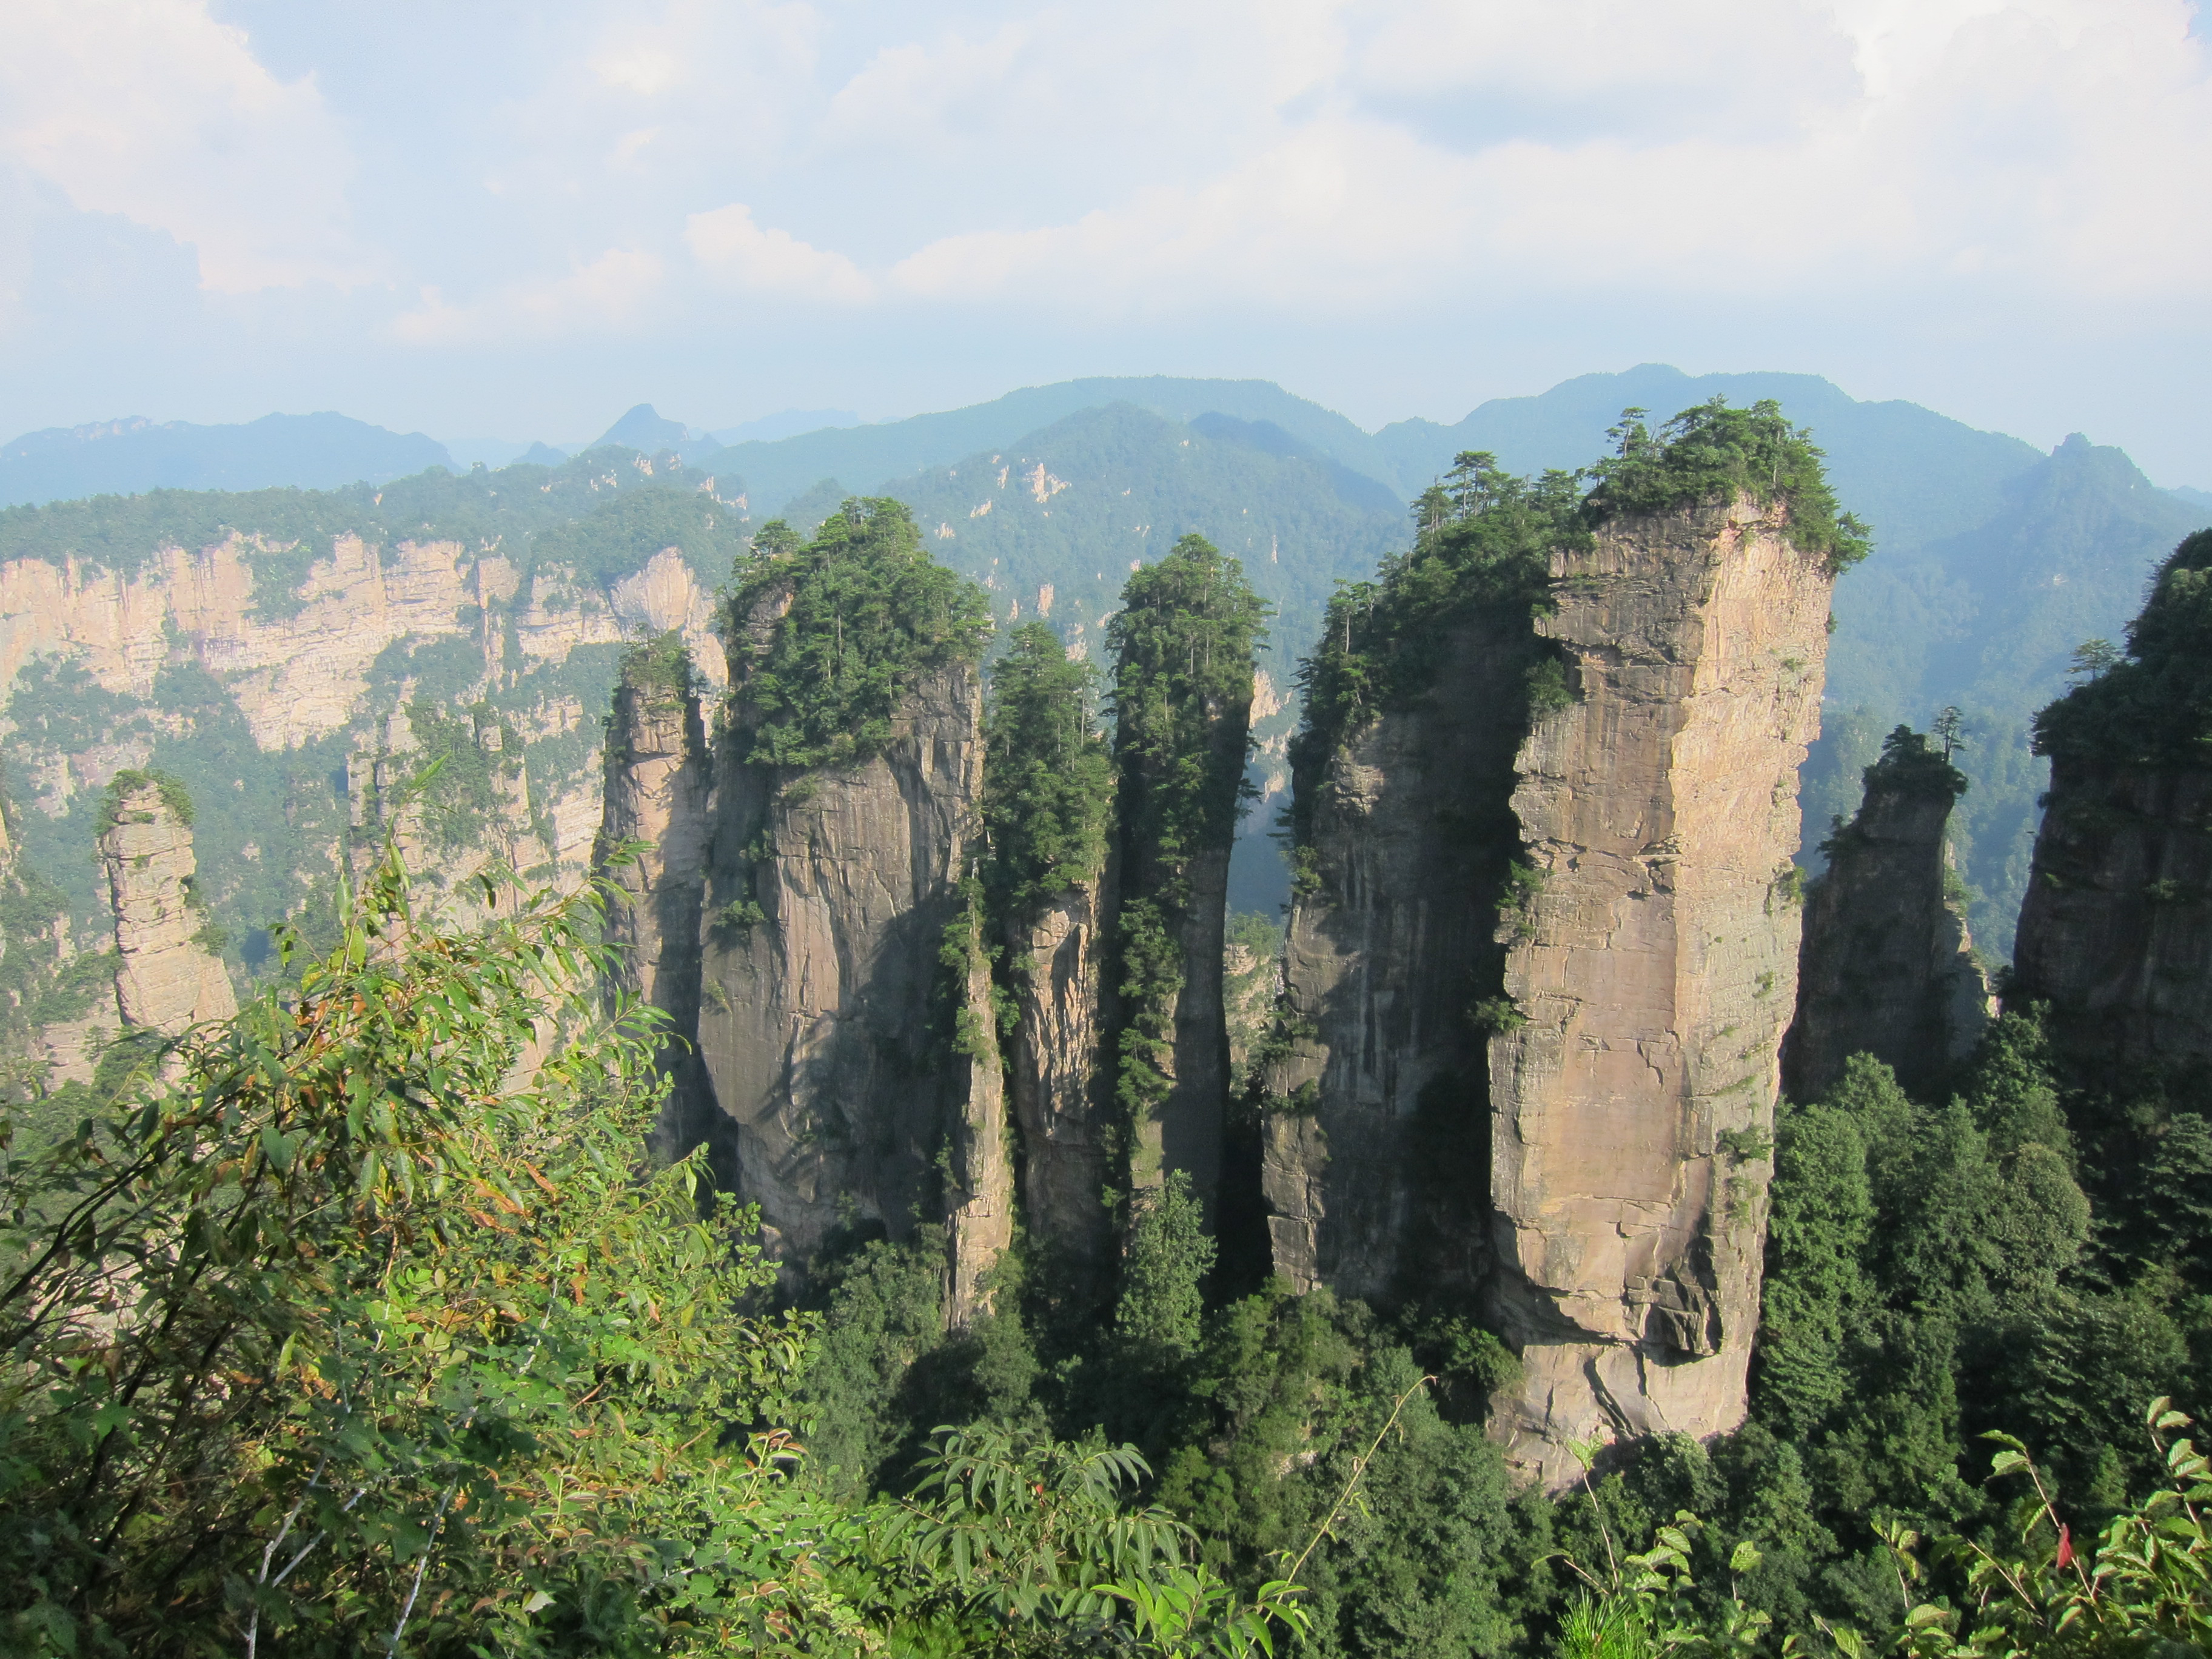 II. A Spectacle of Nature's Magnificence: Majestic Views of the Enchanted Canyon Night in Zhangjiajie